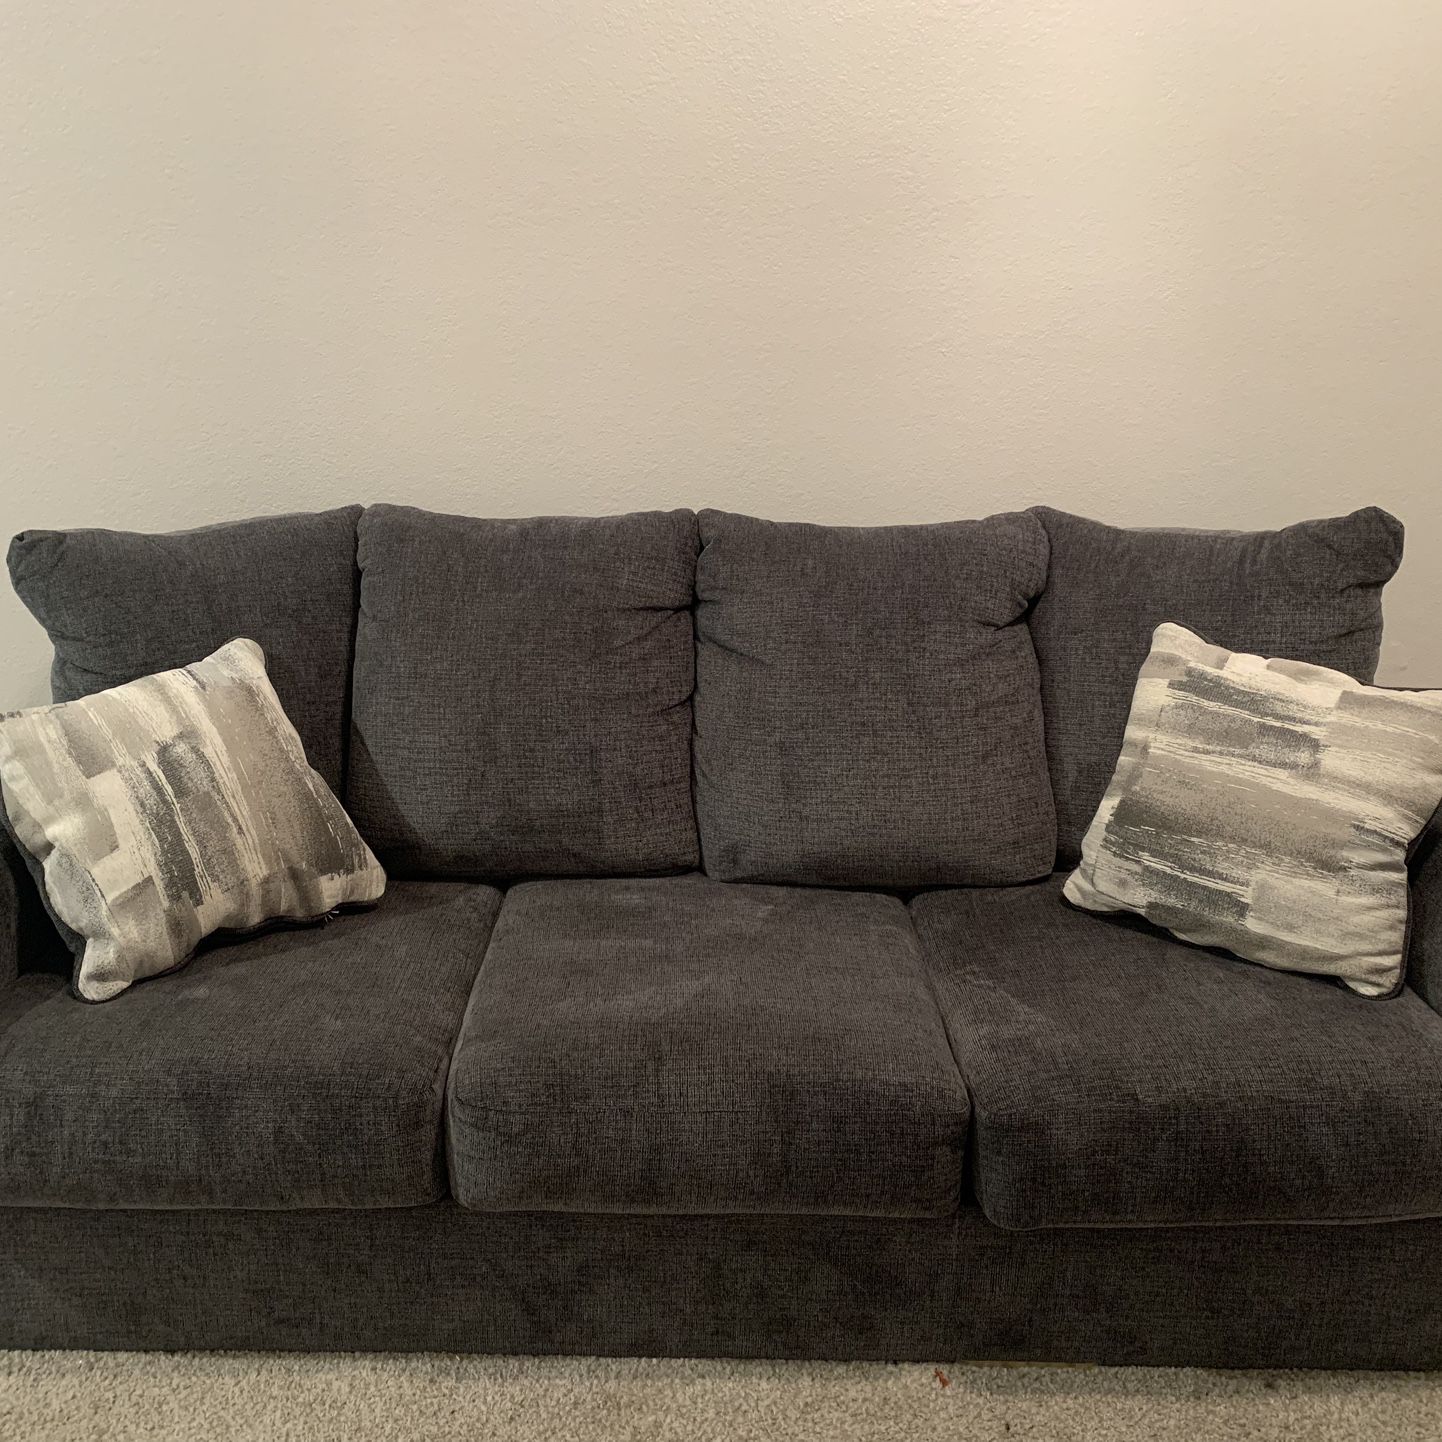 Couch For Sale !! NEED GONE TODAY! 